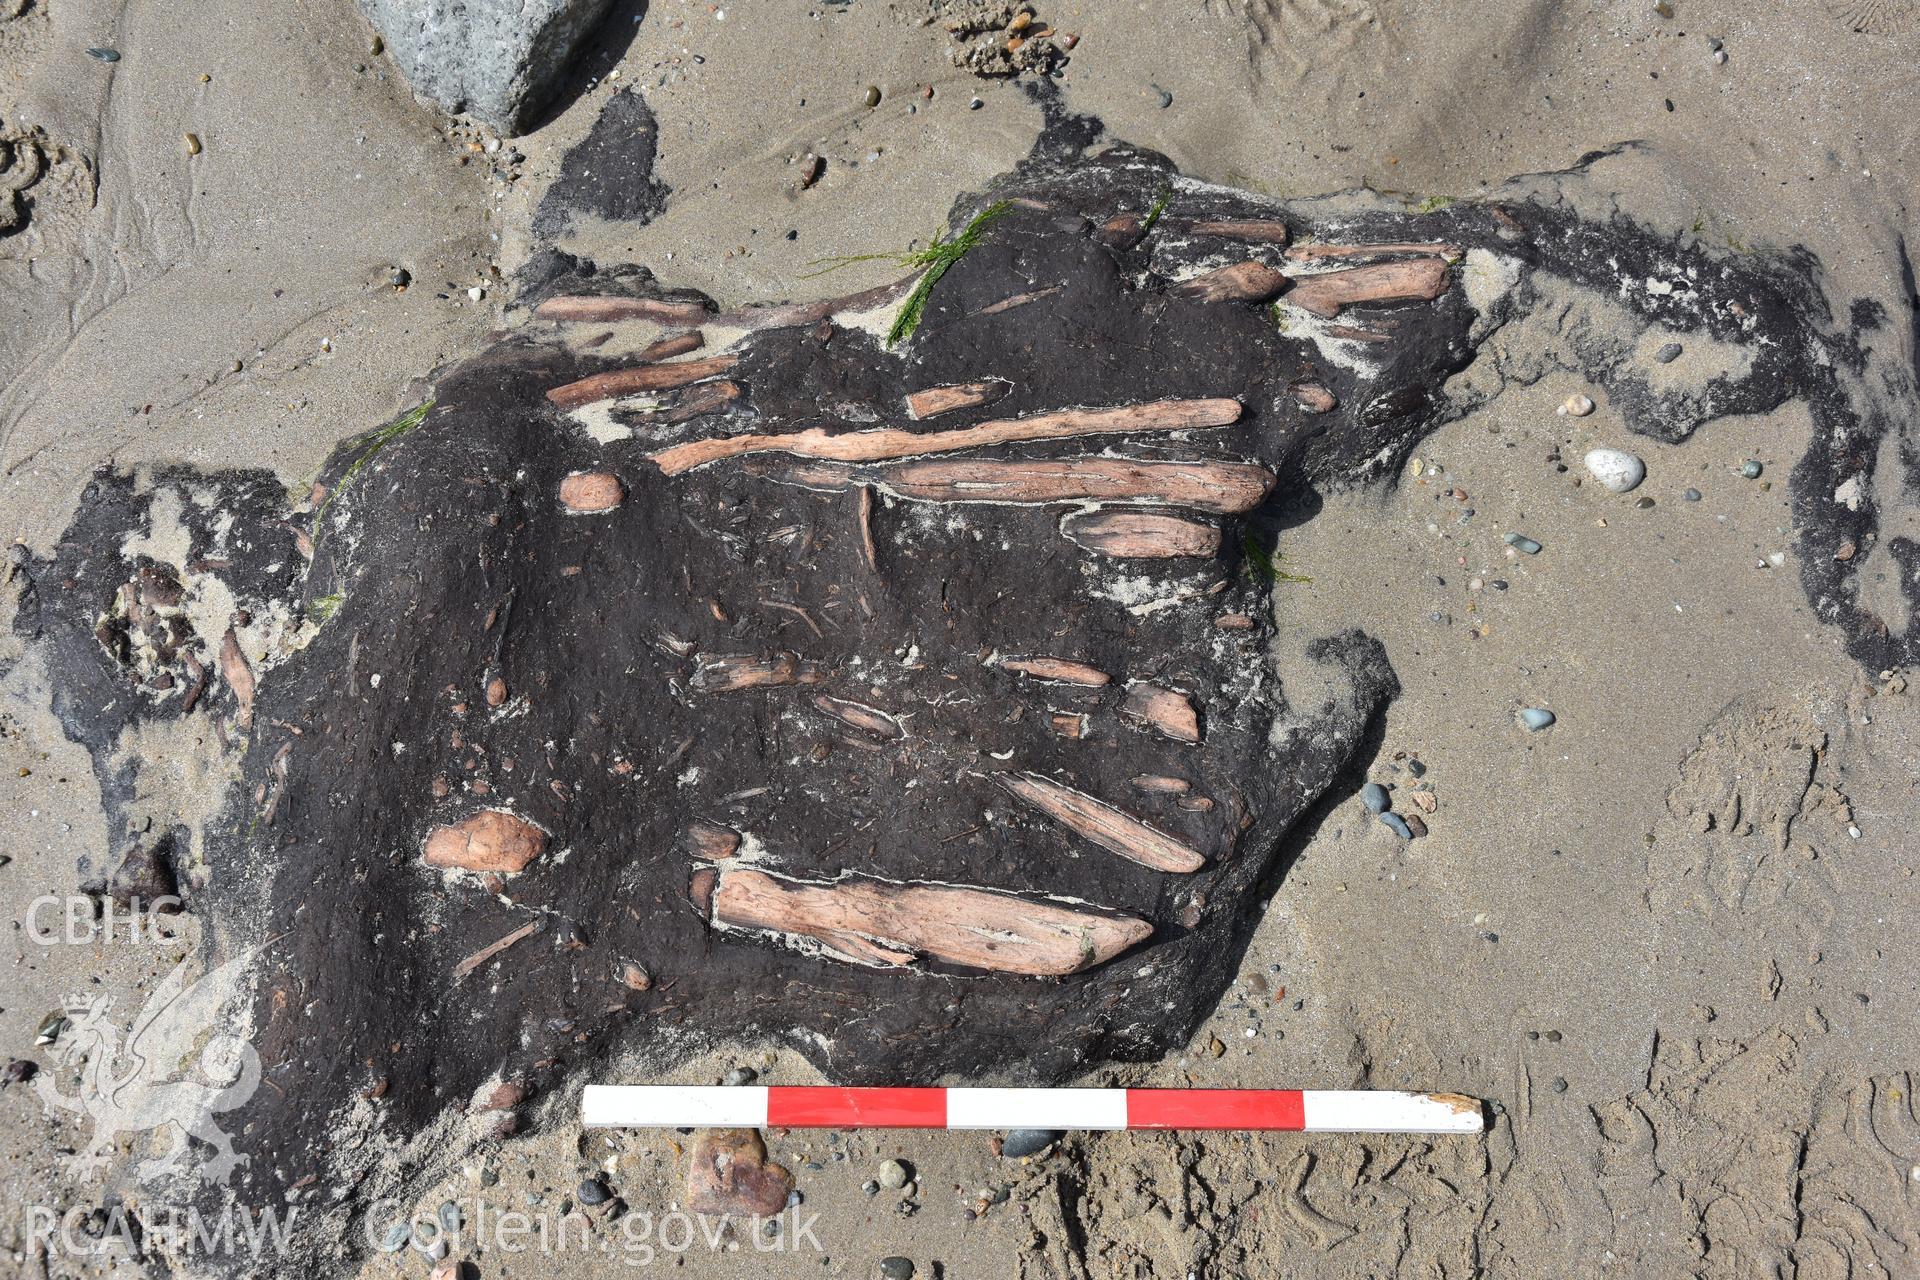 Fragment of probable prehistoric brushwood trackway, at SH 3205 2960, preserved among later peat cuttings on The Warren beach, Abersoch. Recorded with GNSS and photogrammetry for the CHERISH Project. ? Crown: CHERISH PROJECT 2018. Produced with EU funds through the Ireland Wales Co-operation Programme 2014-2020. All material made freely available through the Open Government Licence.